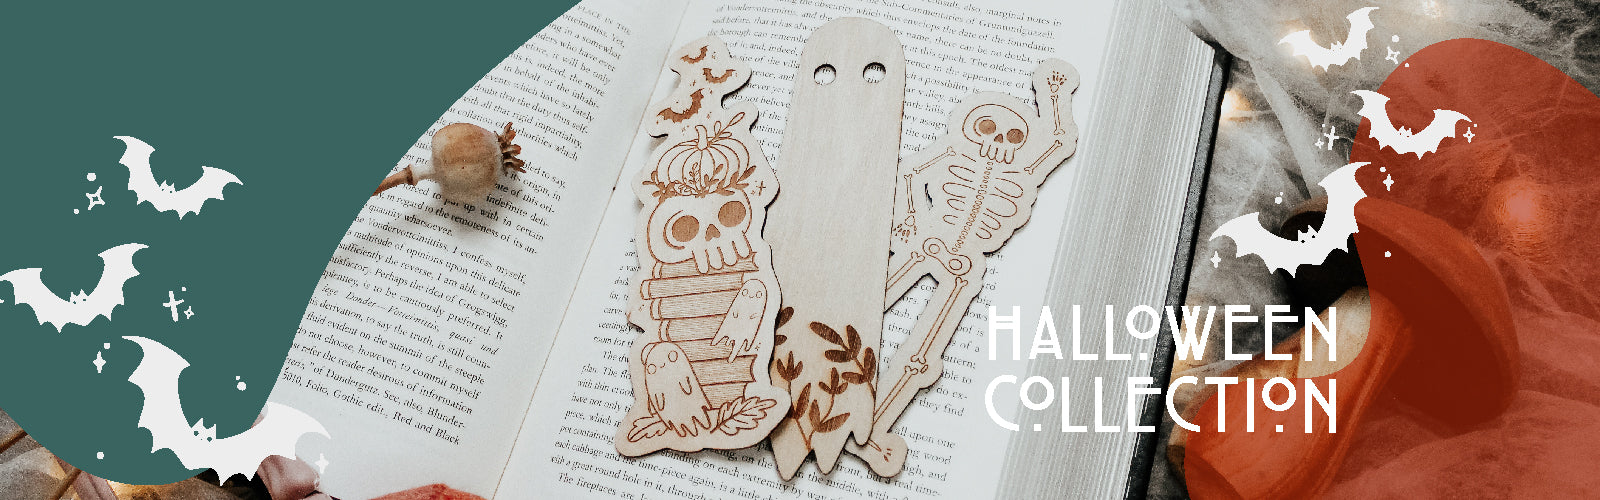 Halloween Collection banner including images of newly launched wooden spooky bookmarks with skulls, ghosts, and skeleton designs 